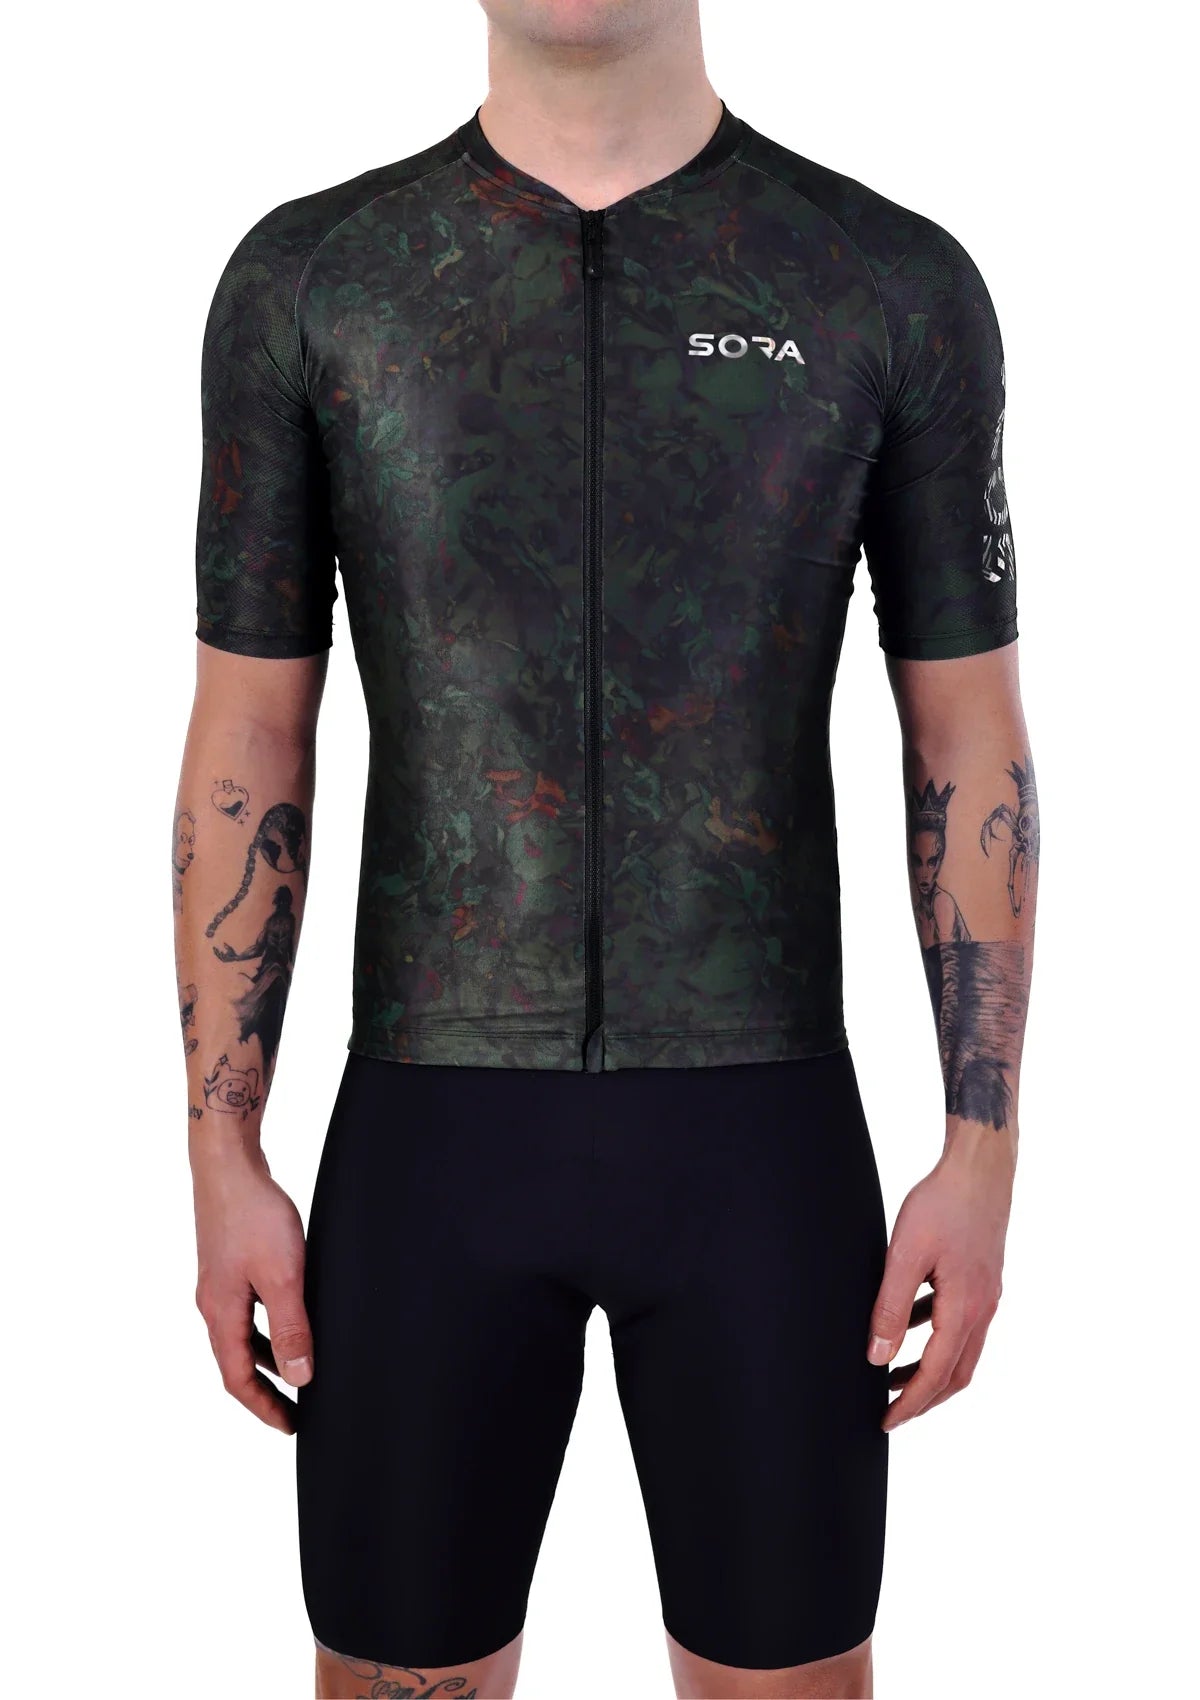 Classic cycling jersey Myst